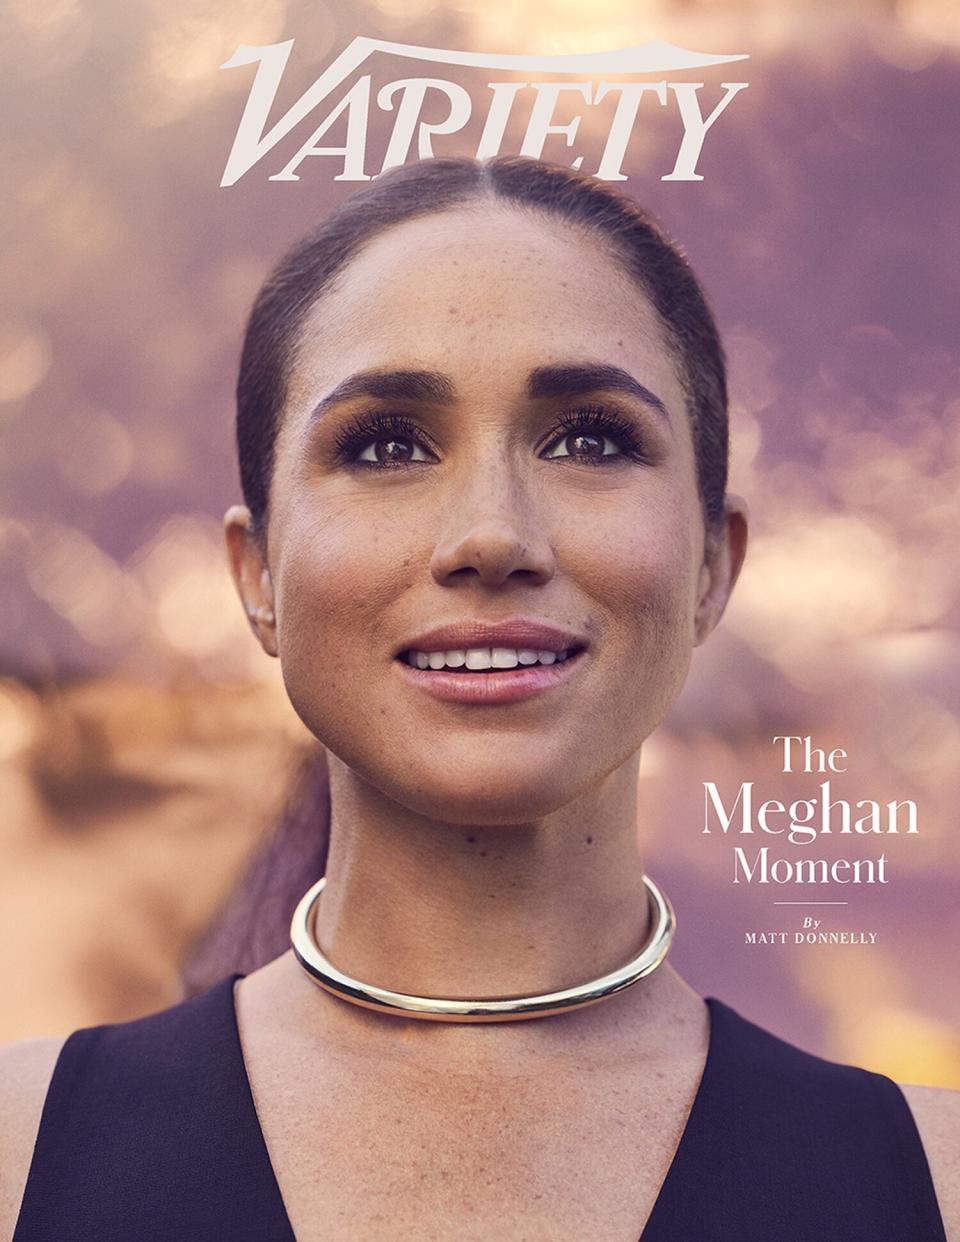 The Duchess of Sussex Meghan Markle fronts the latest cover of VARIETY